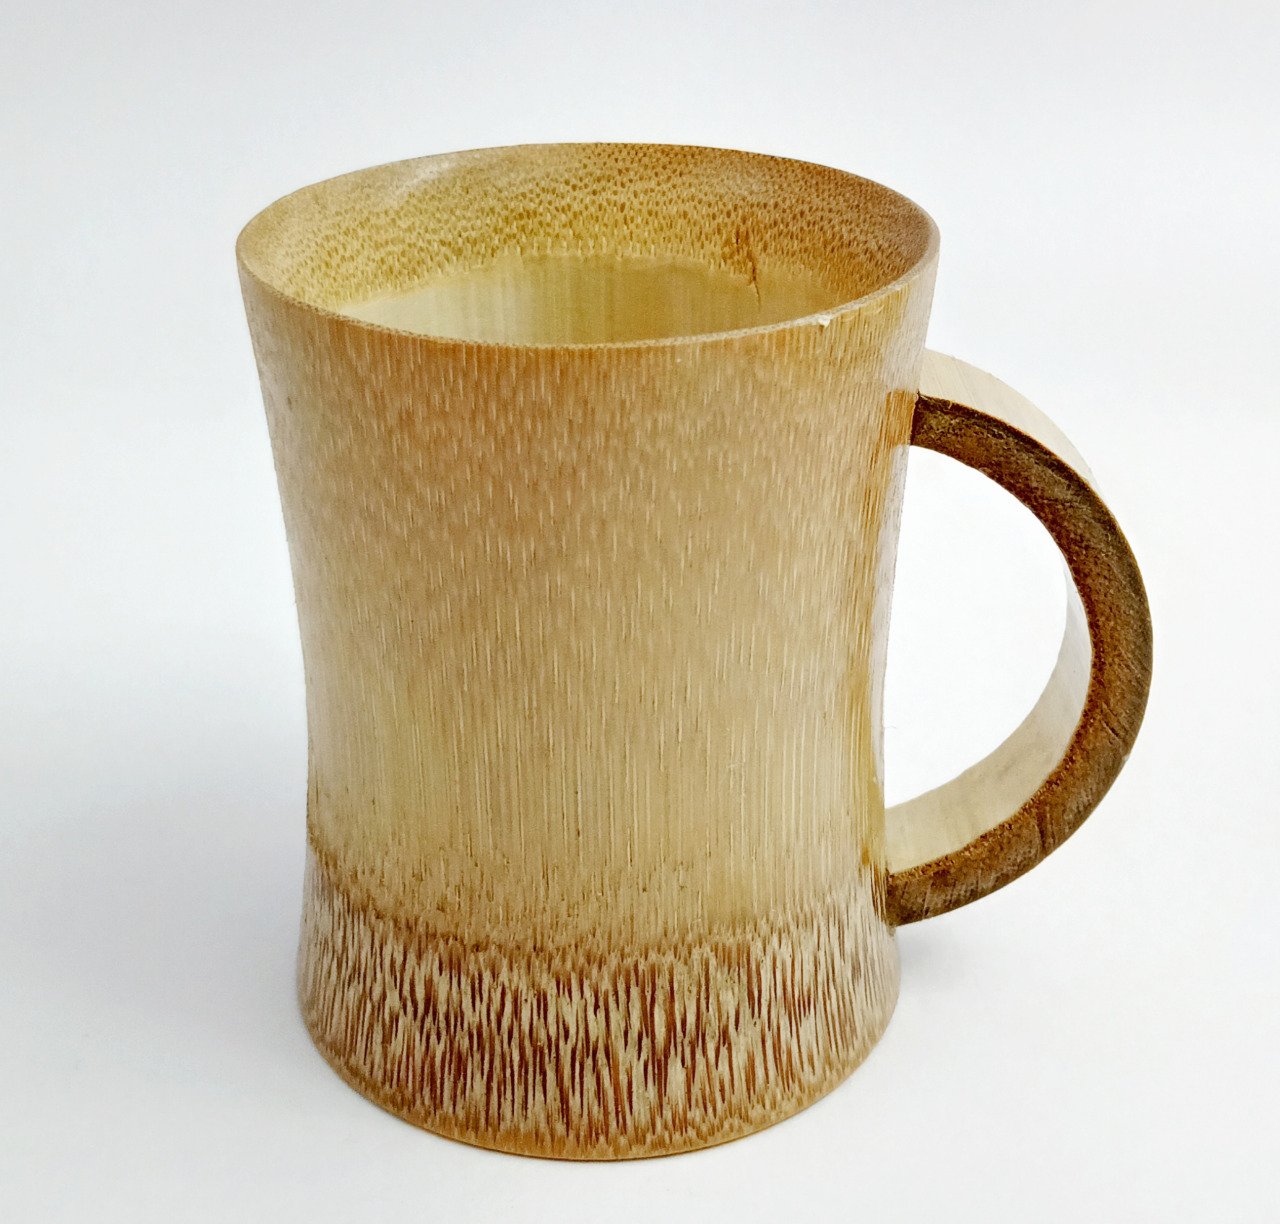 Natural bamboo Cup For Natural Tea Class Of Indian Handicraft 3 Inch Height Pack Of 6